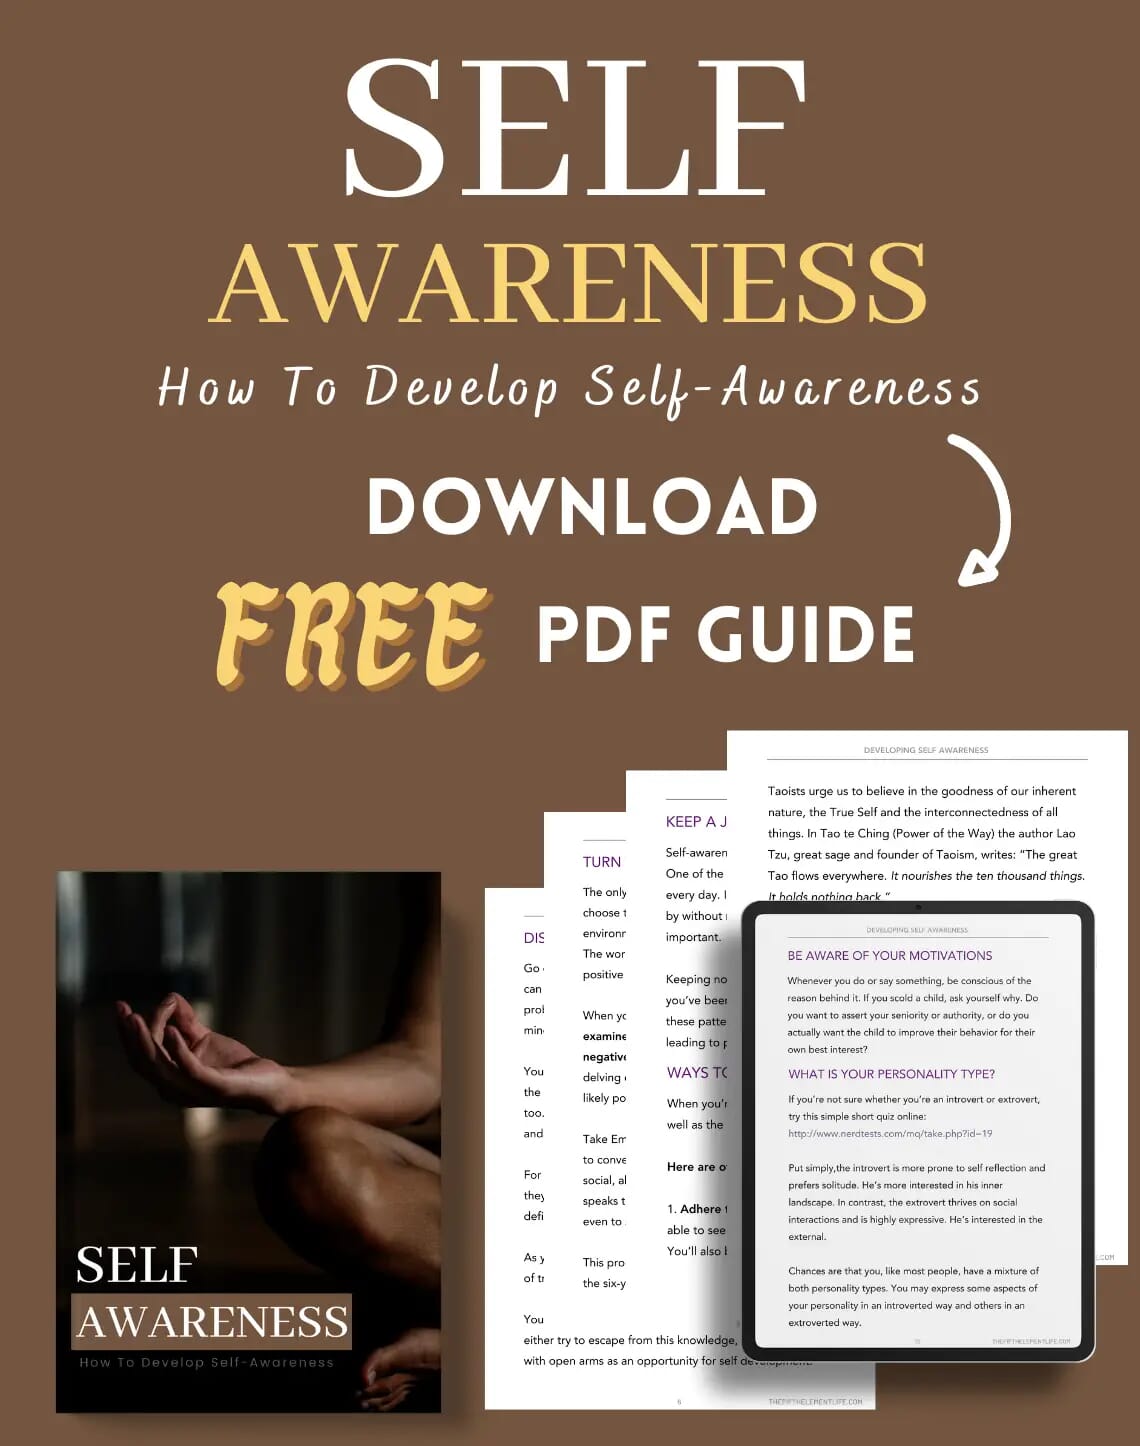 Embracing The Power Within: "How To Develop Self-Awareness" Online Journal FREE DOWNLOAD